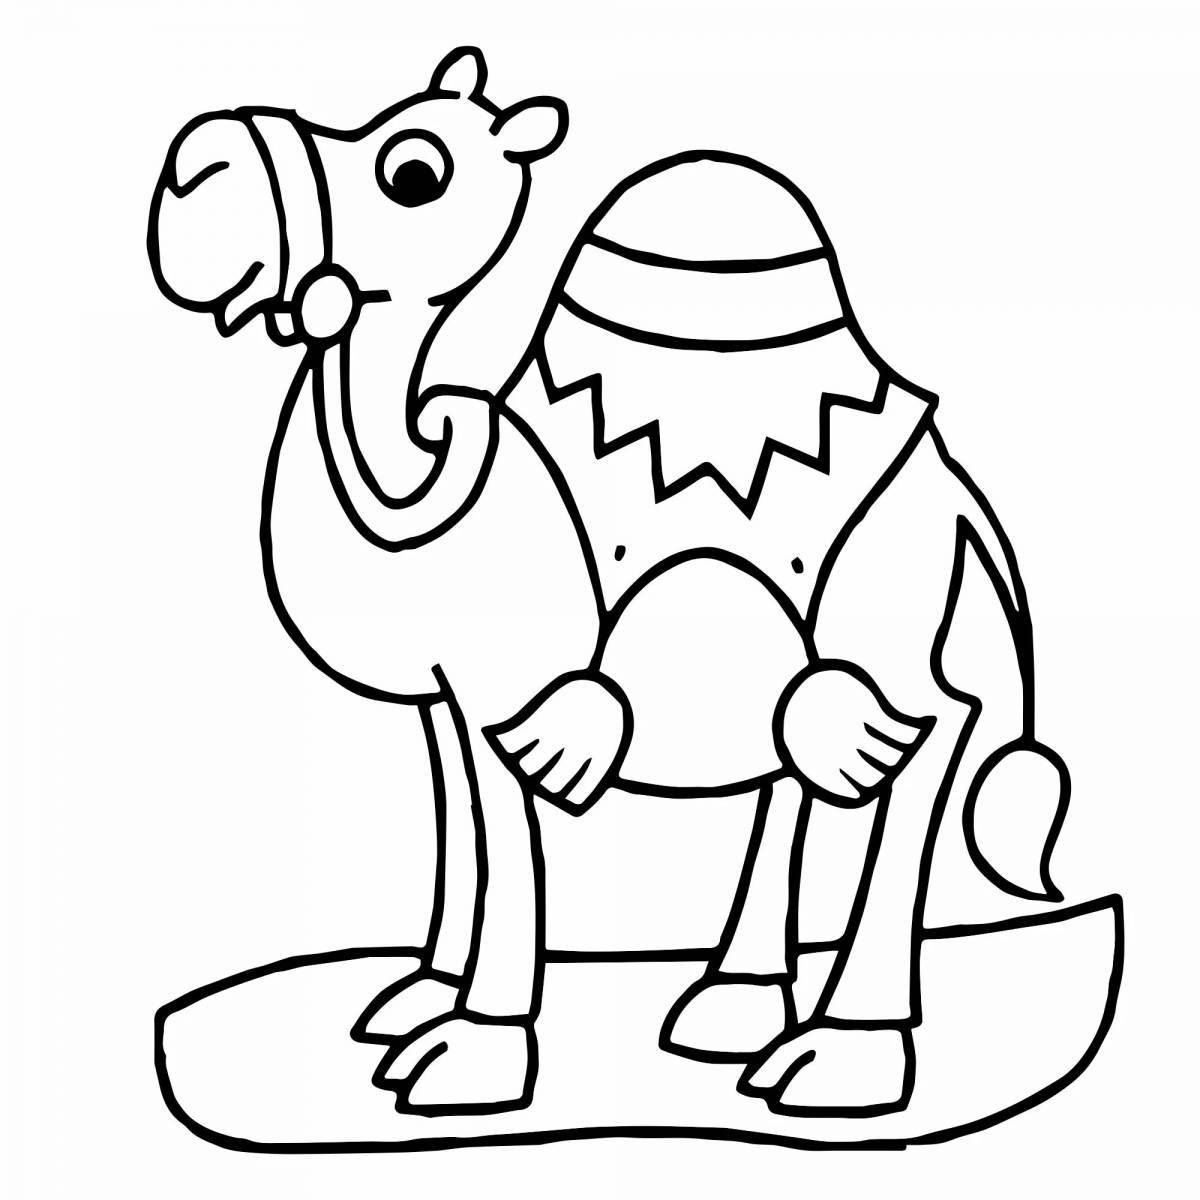 Entertaining coloring camel for children 6-7 years old